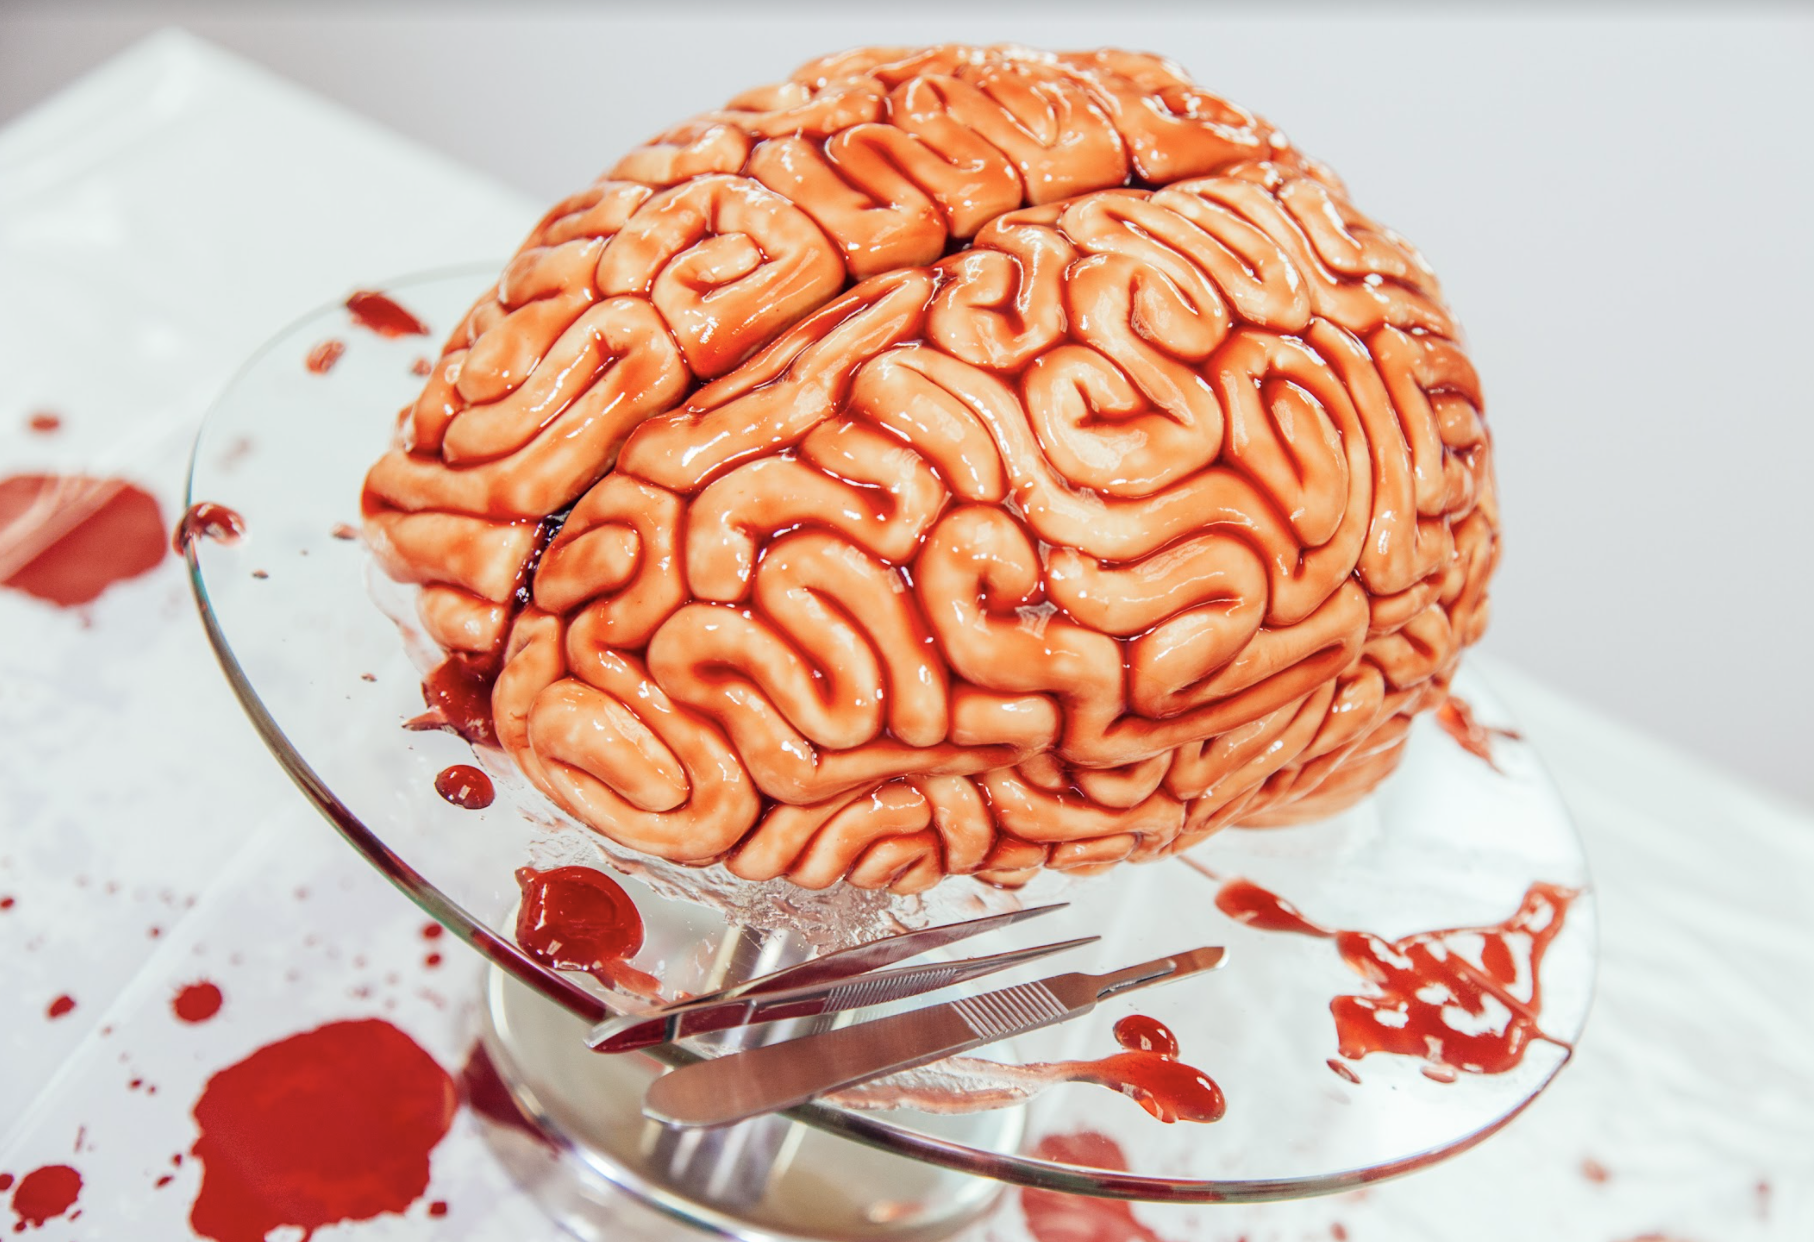 How to Make a Brain Cake for Halloween - Realistic and Delicious Brain Cake  Recipe